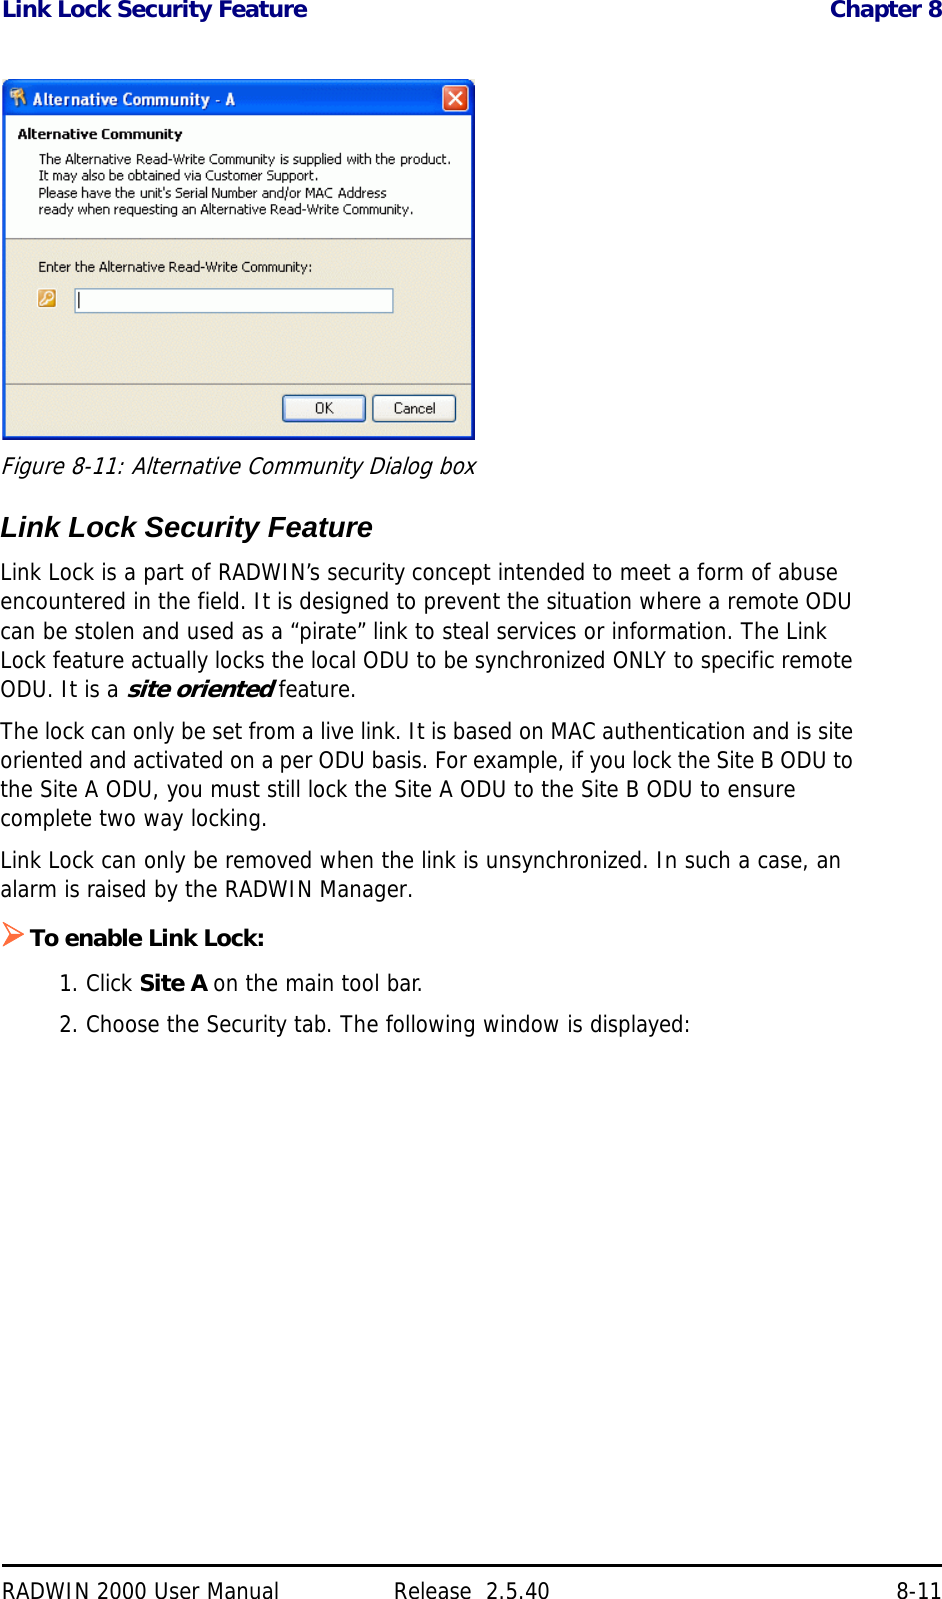 Link Lock Security Feature Chapter 8RADWIN 2000 User Manual Release  2.5.40 8-11Figure 8-11: Alternative Community Dialog boxLink Lock Security FeatureLink Lock is a part of RADWIN’s security concept intended to meet a form of abuse encountered in the field. It is designed to prevent the situation where a remote ODU can be stolen and used as a “pirate” link to steal services or information. The Link Lock feature actually locks the local ODU to be synchronized ONLY to specific remote ODU. It is a site oriented feature.The lock can only be set from a live link. It is based on MAC authentication and is site oriented and activated on a per ODU basis. For example, if you lock the Site B ODU to the Site A ODU, you must still lock the Site A ODU to the Site B ODU to ensure complete two way locking.Link Lock can only be removed when the link is unsynchronized. In such a case, an alarm is raised by the RADWIN Manager.To enable Link Lock:1. Click Site A on the main tool bar.2. Choose the Security tab. The following window is displayed: